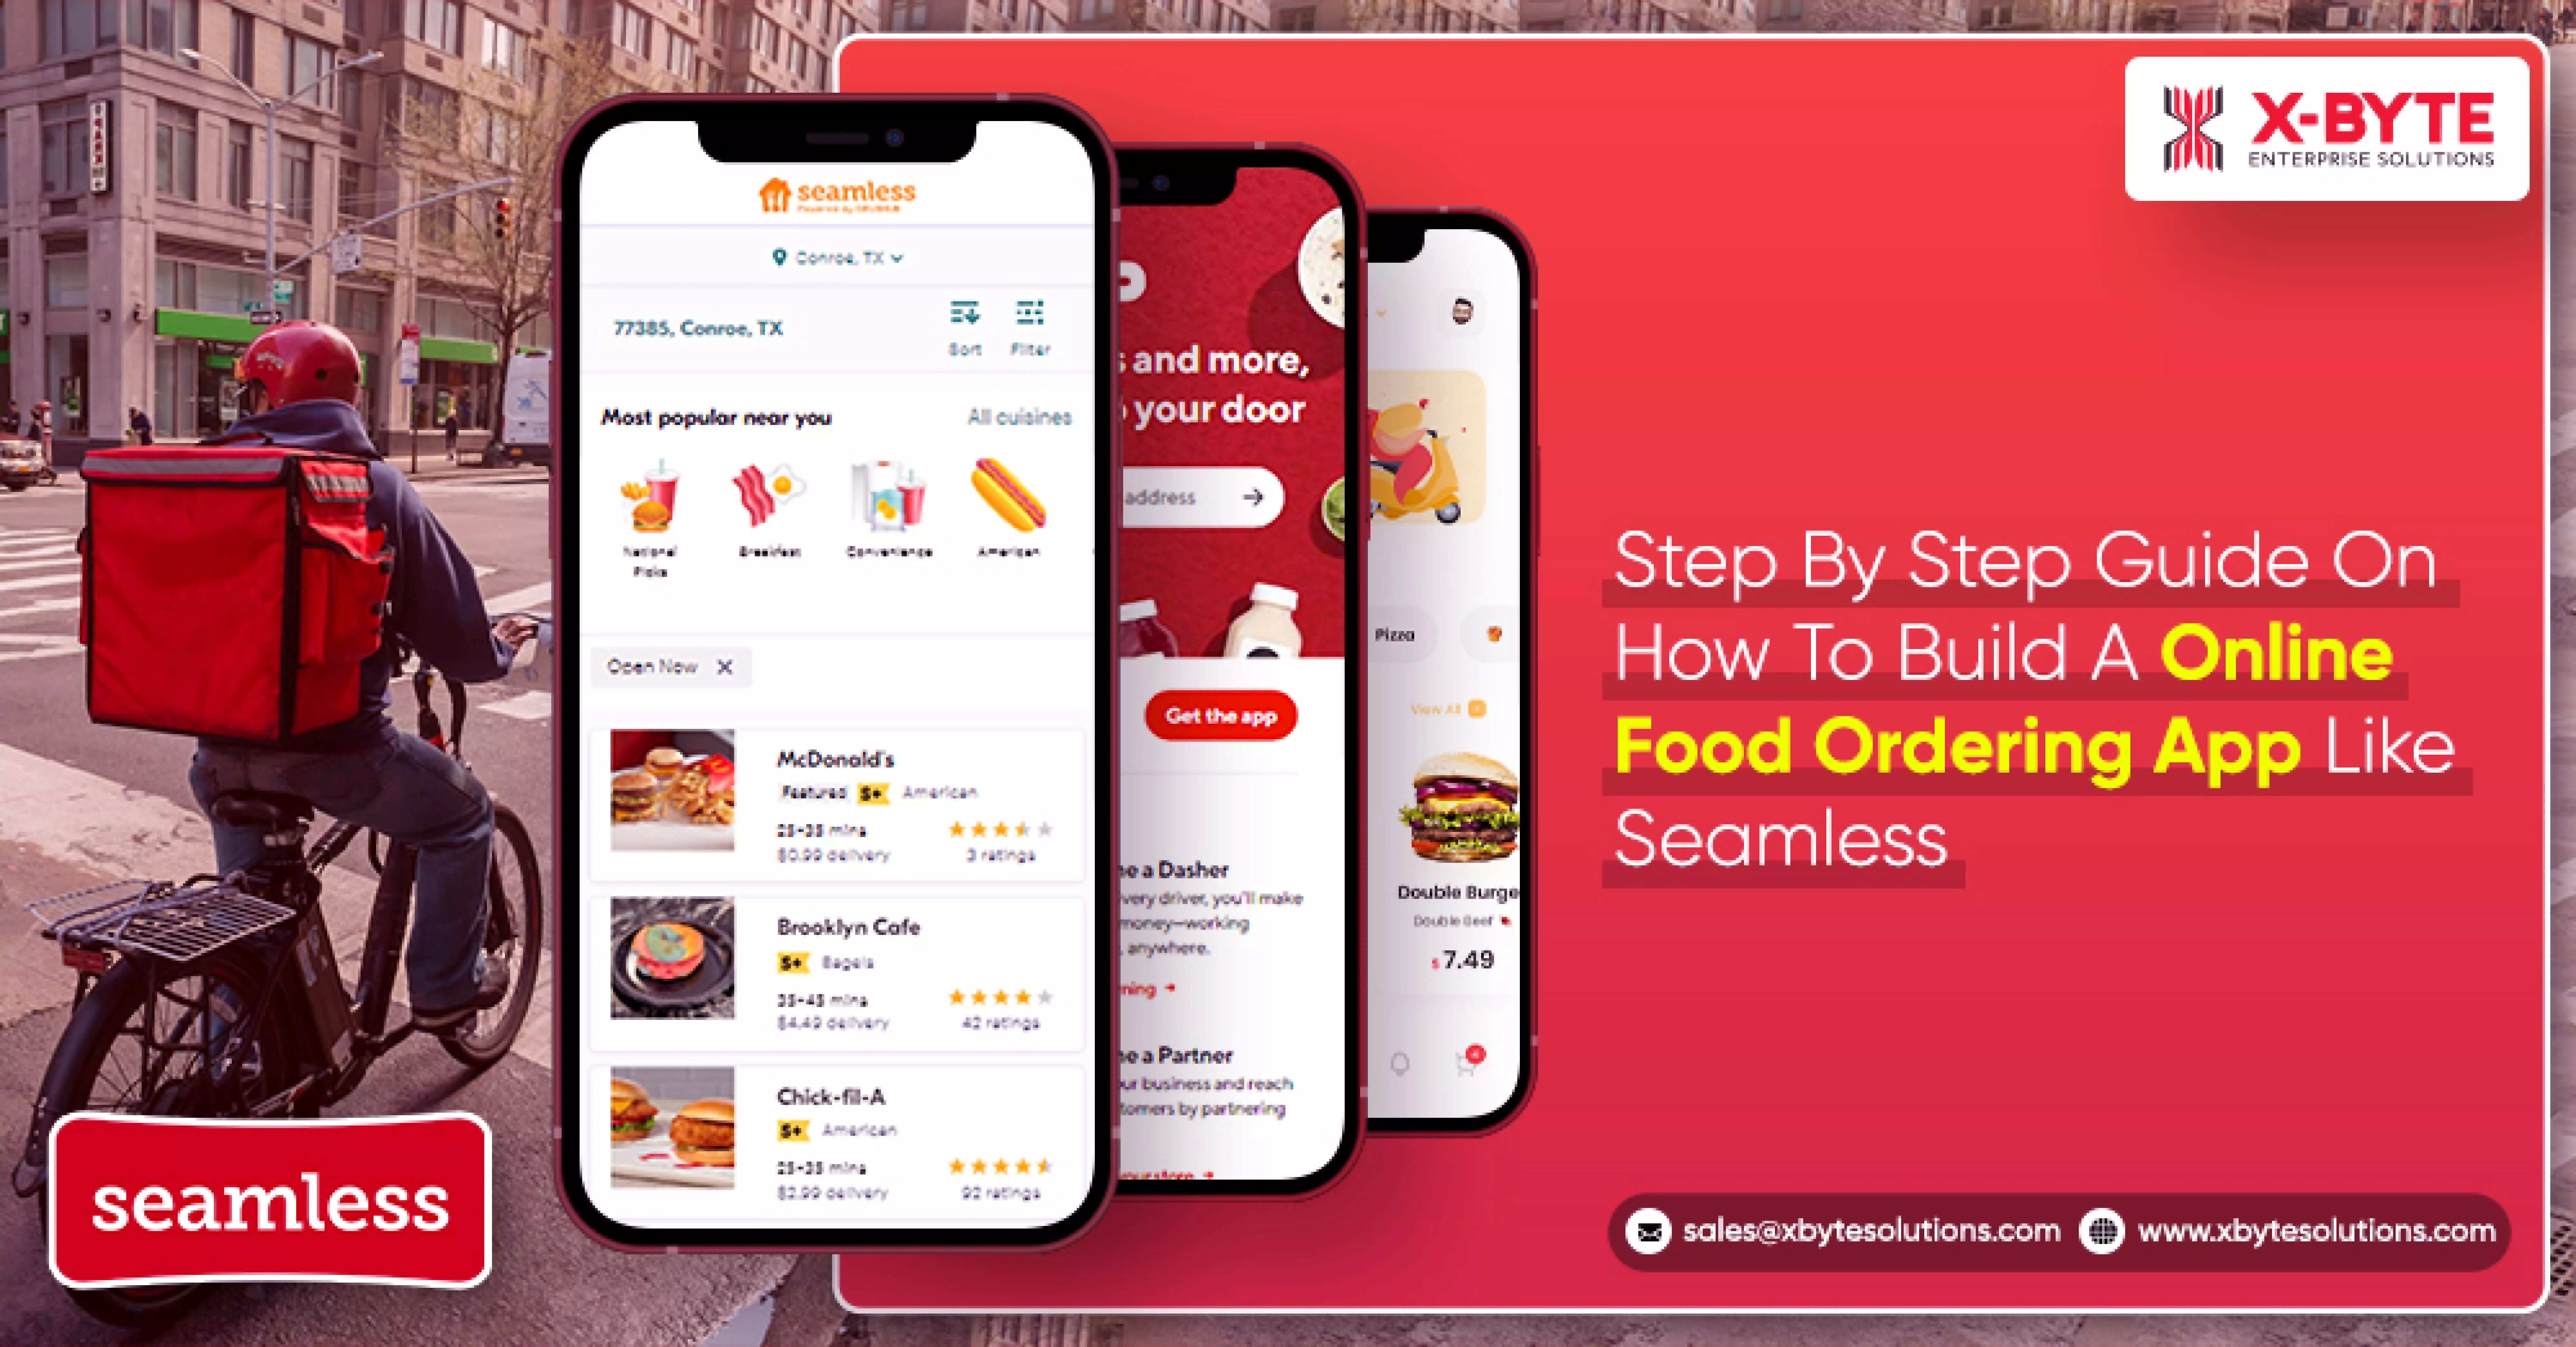 Step By Step Guide On How To Build A Food Ordering App Like Seamless